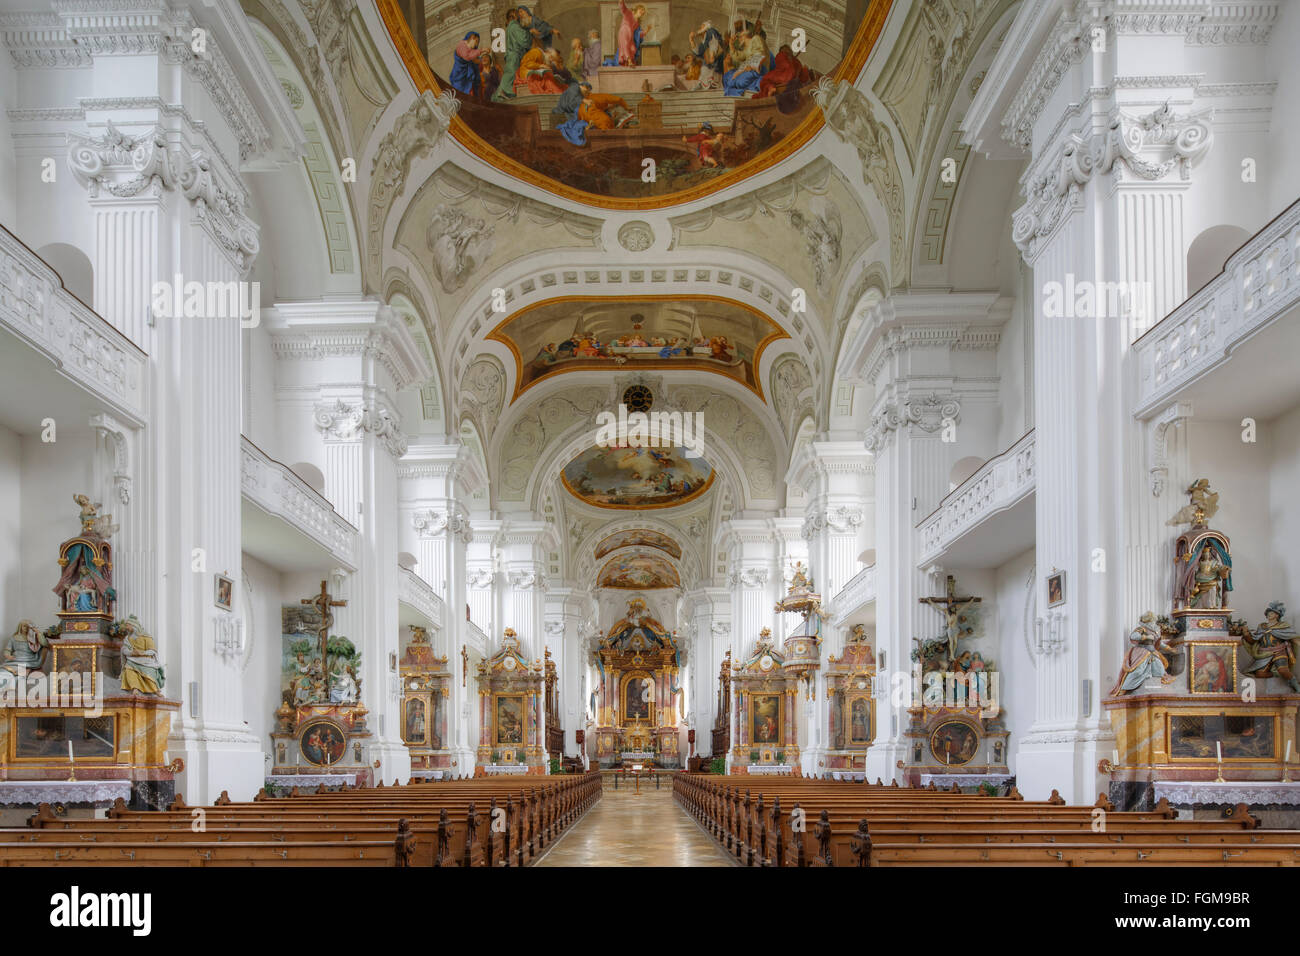 Interior of the monastery church of St. Verena, Rot an der Rot Abbey, Rot an der Rot, Upper Swabia, Swabia, Baden-Württemberg Stock Photo